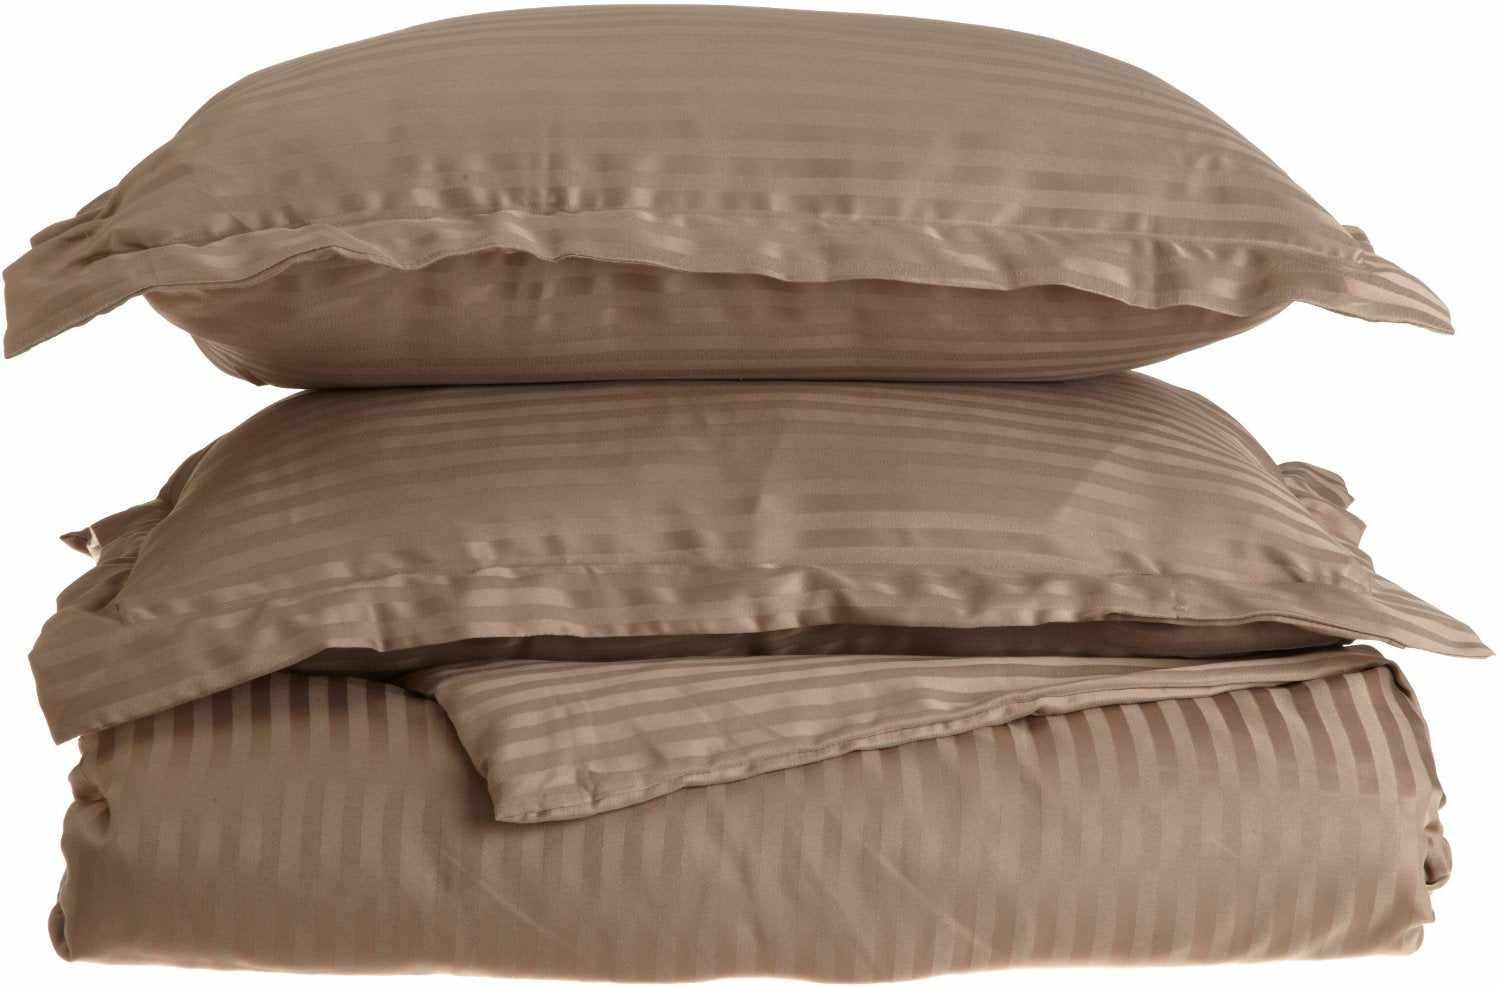  Superior Microfiber Wrinkle-Free Stripe Breathable Duvet Cover Set with Button Closure -  Taupe